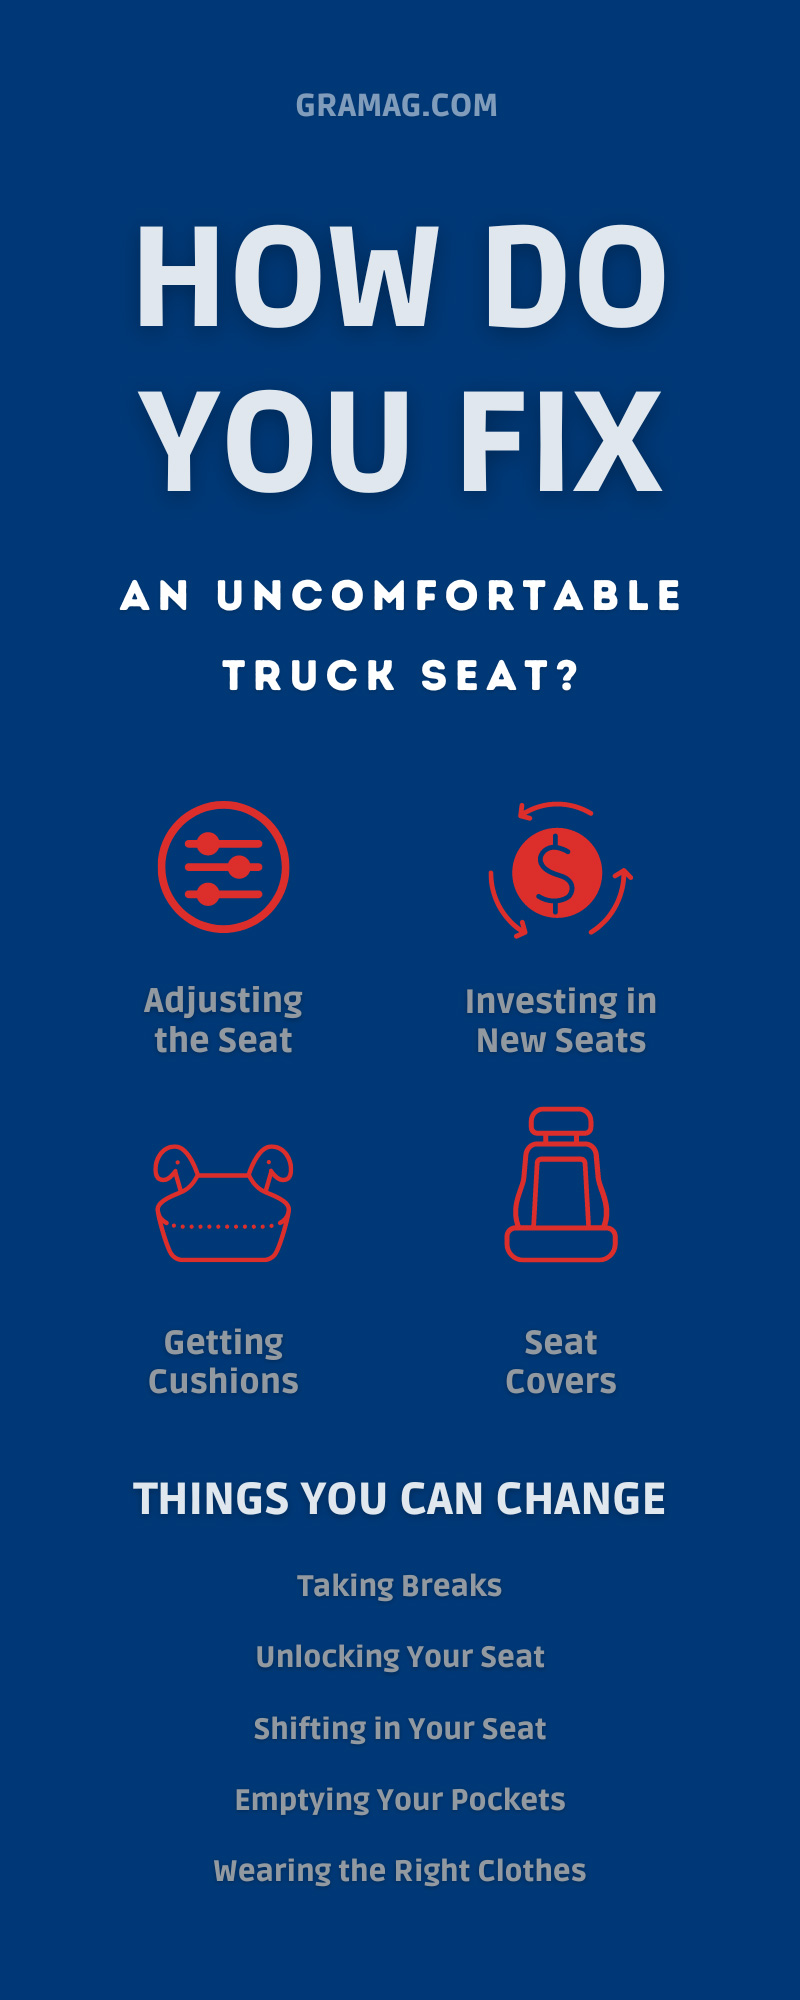 How Do You Fix an Uncomfortable Truck Seat?